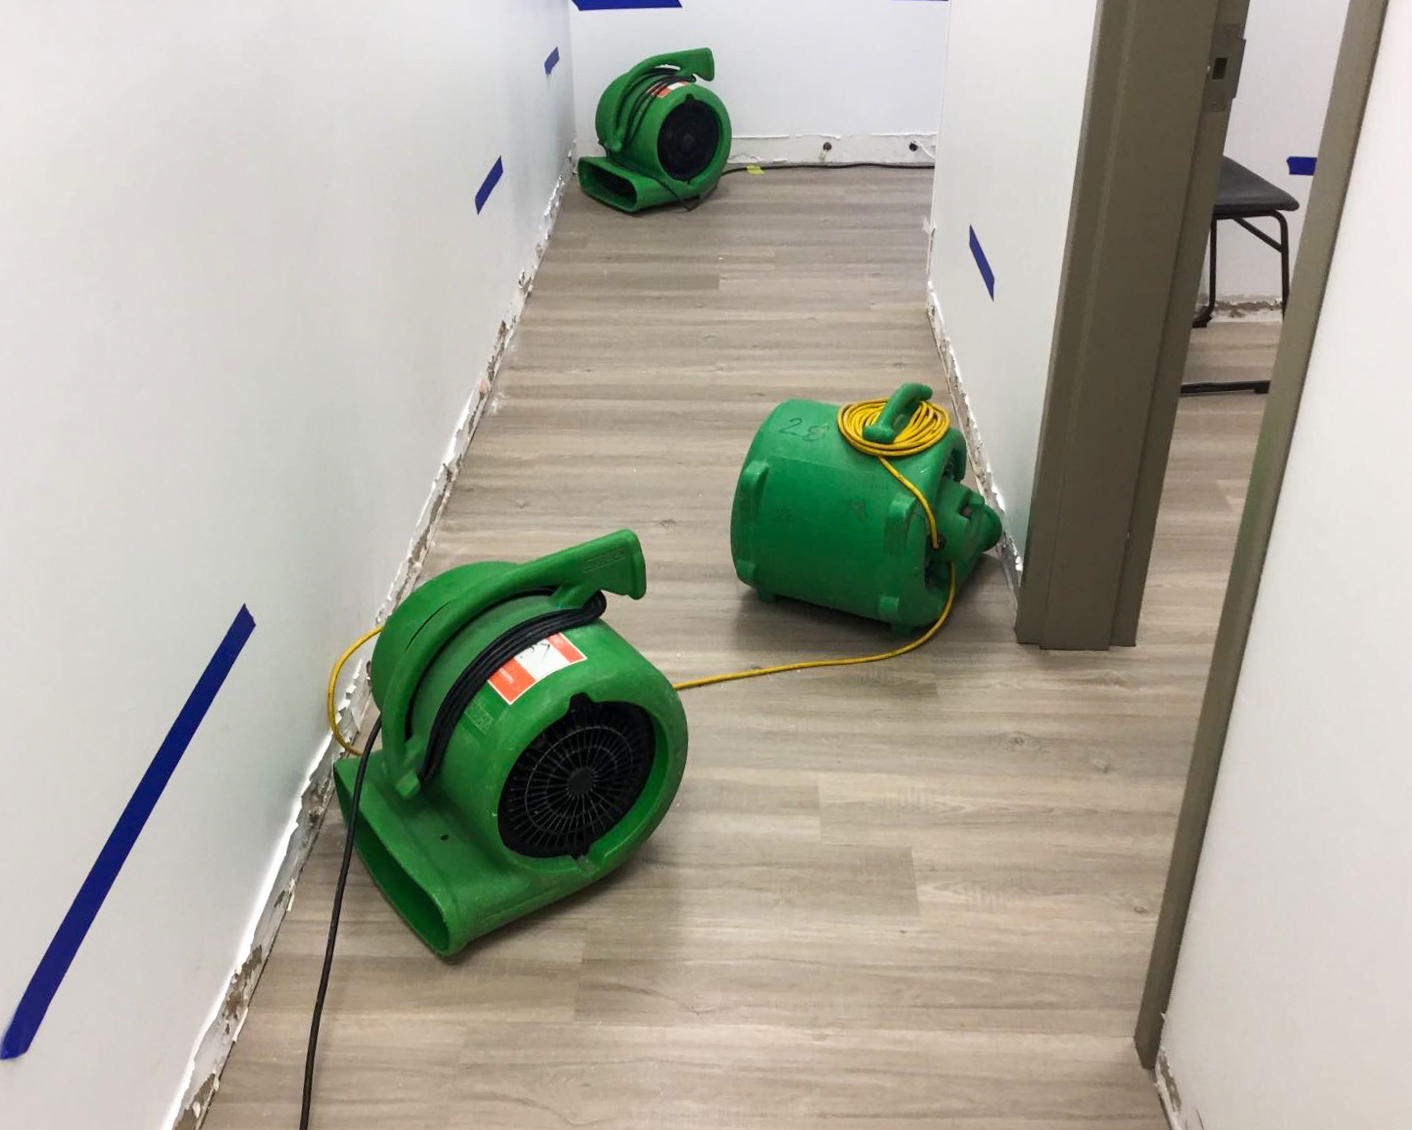 Our team at SERVPRO of Yavapai County is on call 24/7 to better help you with your water damage restoration in. Call the pros at SERVPRO. We Make It "Like it never even happened." 